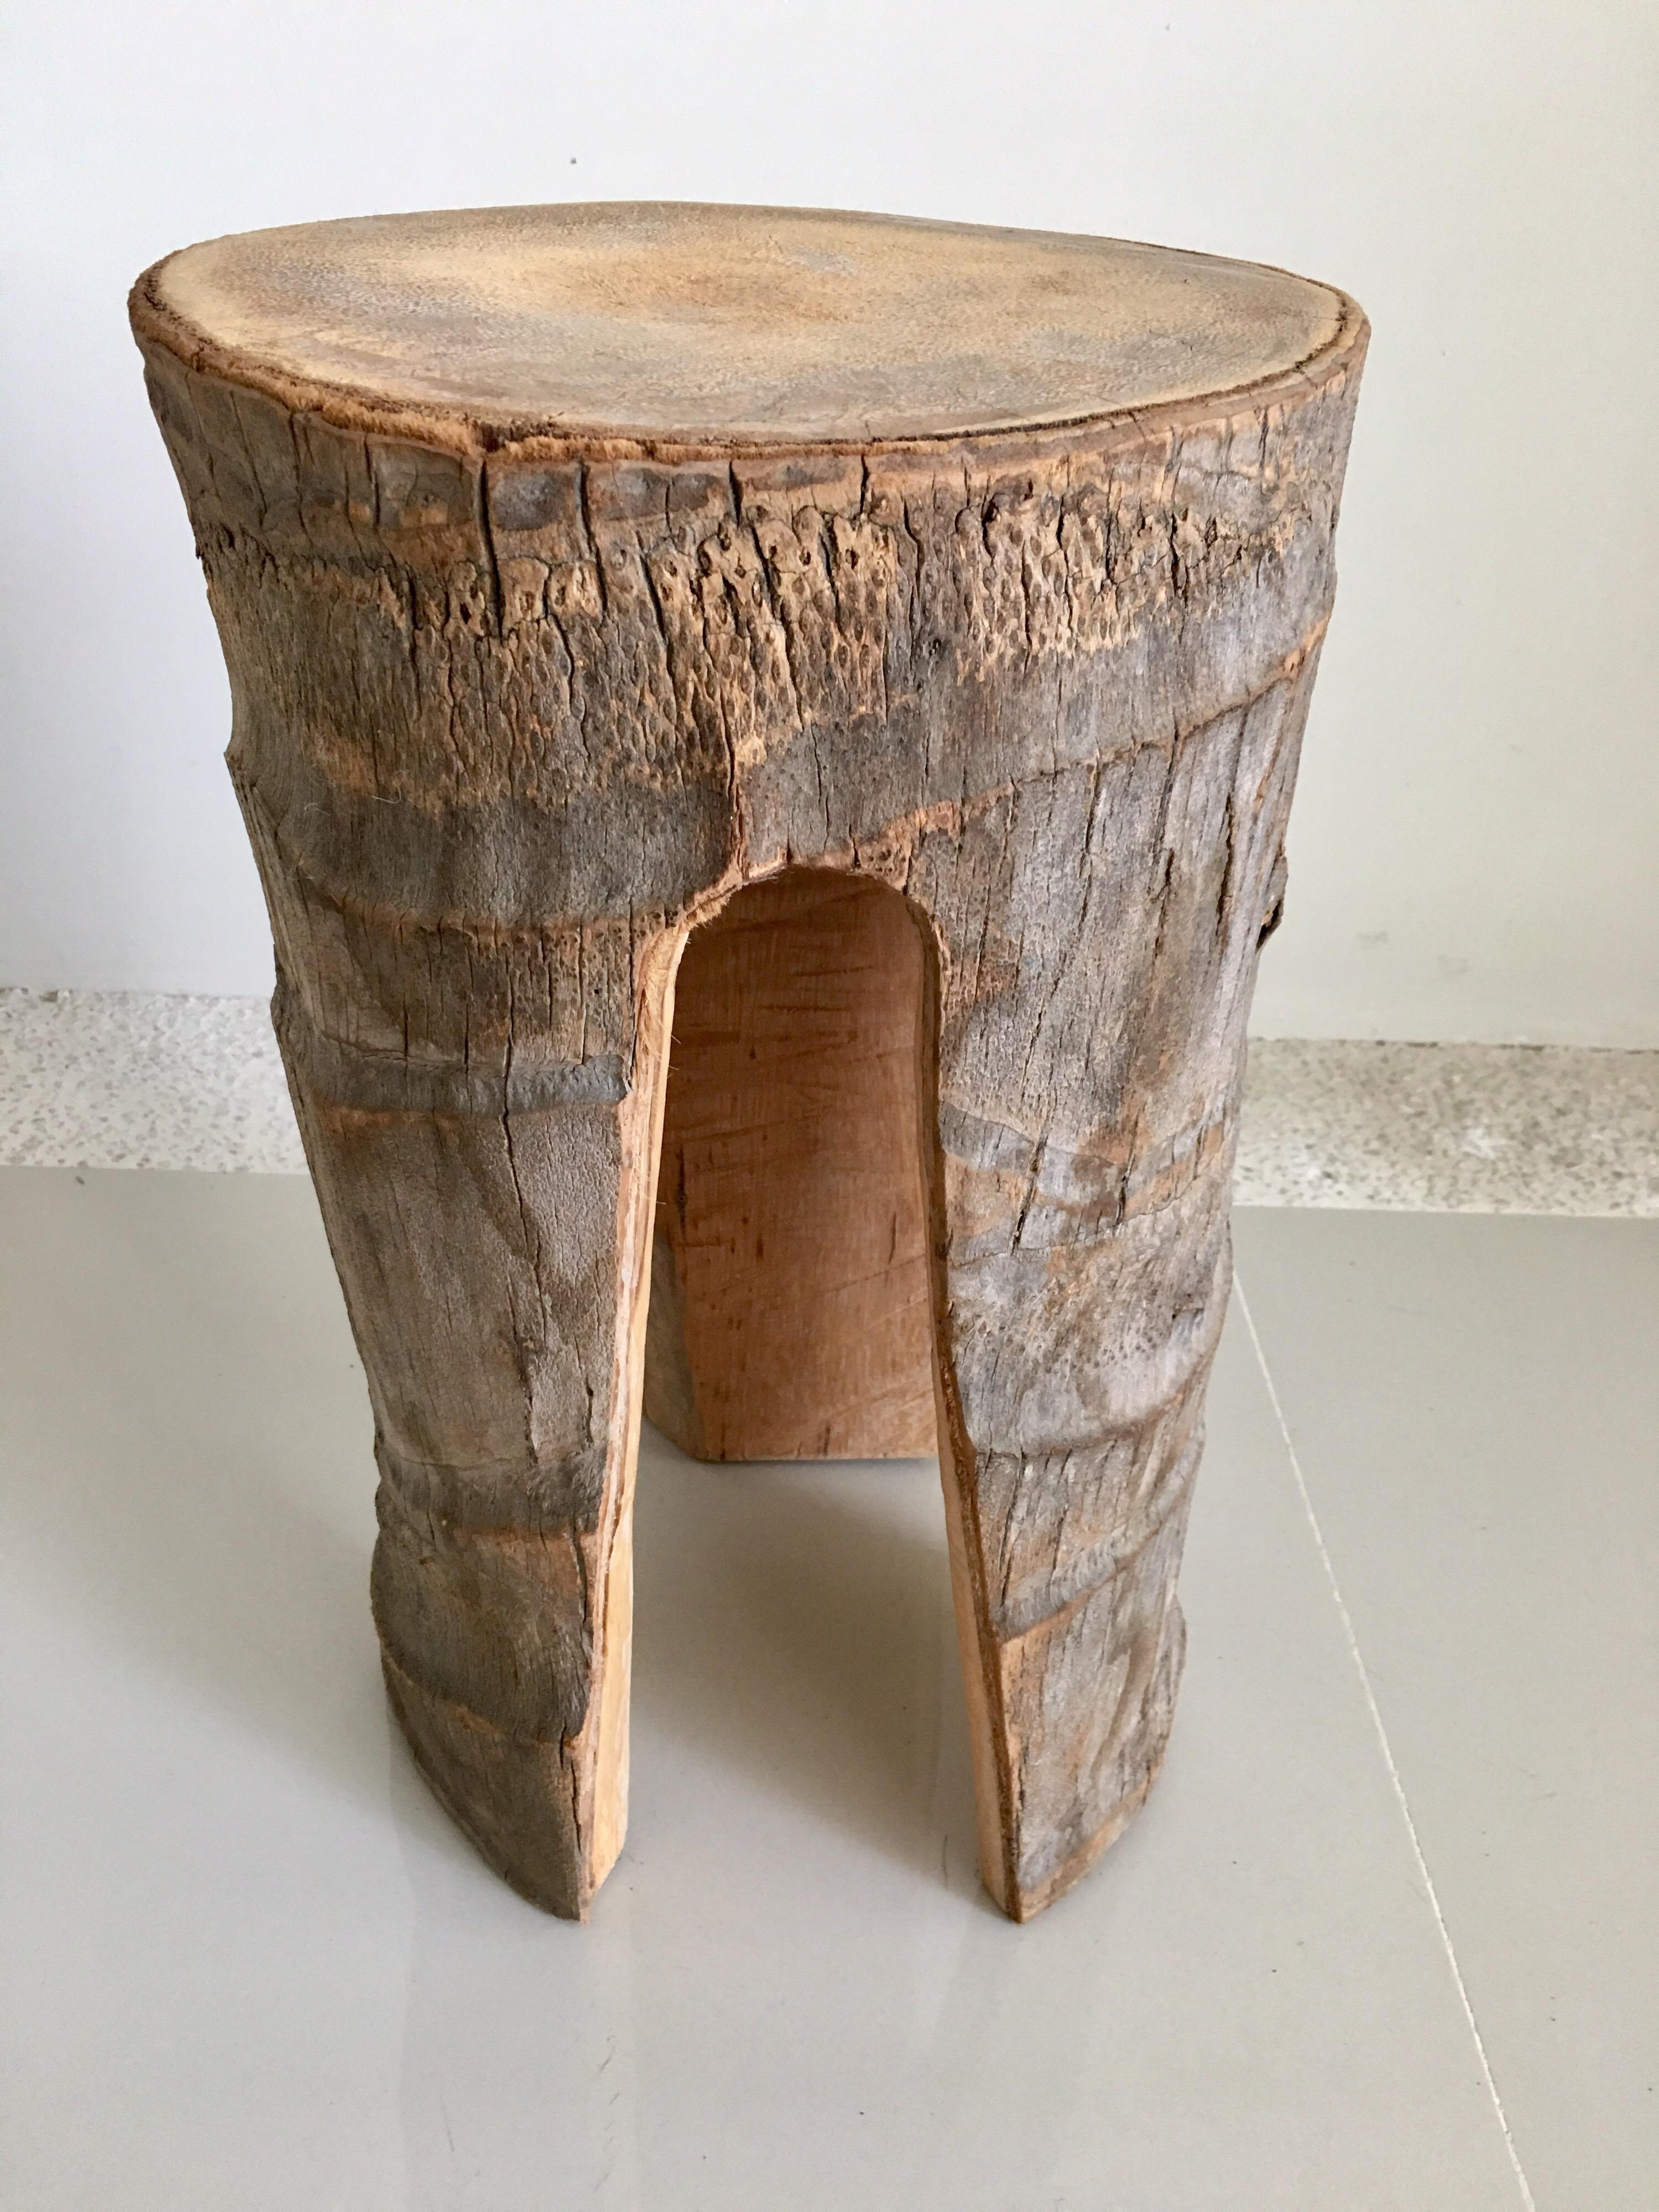 Wooden stool hand carved from felled palm tree in the Cabo Corrientes area of Jalisco, Mexico. This piece was carved by 